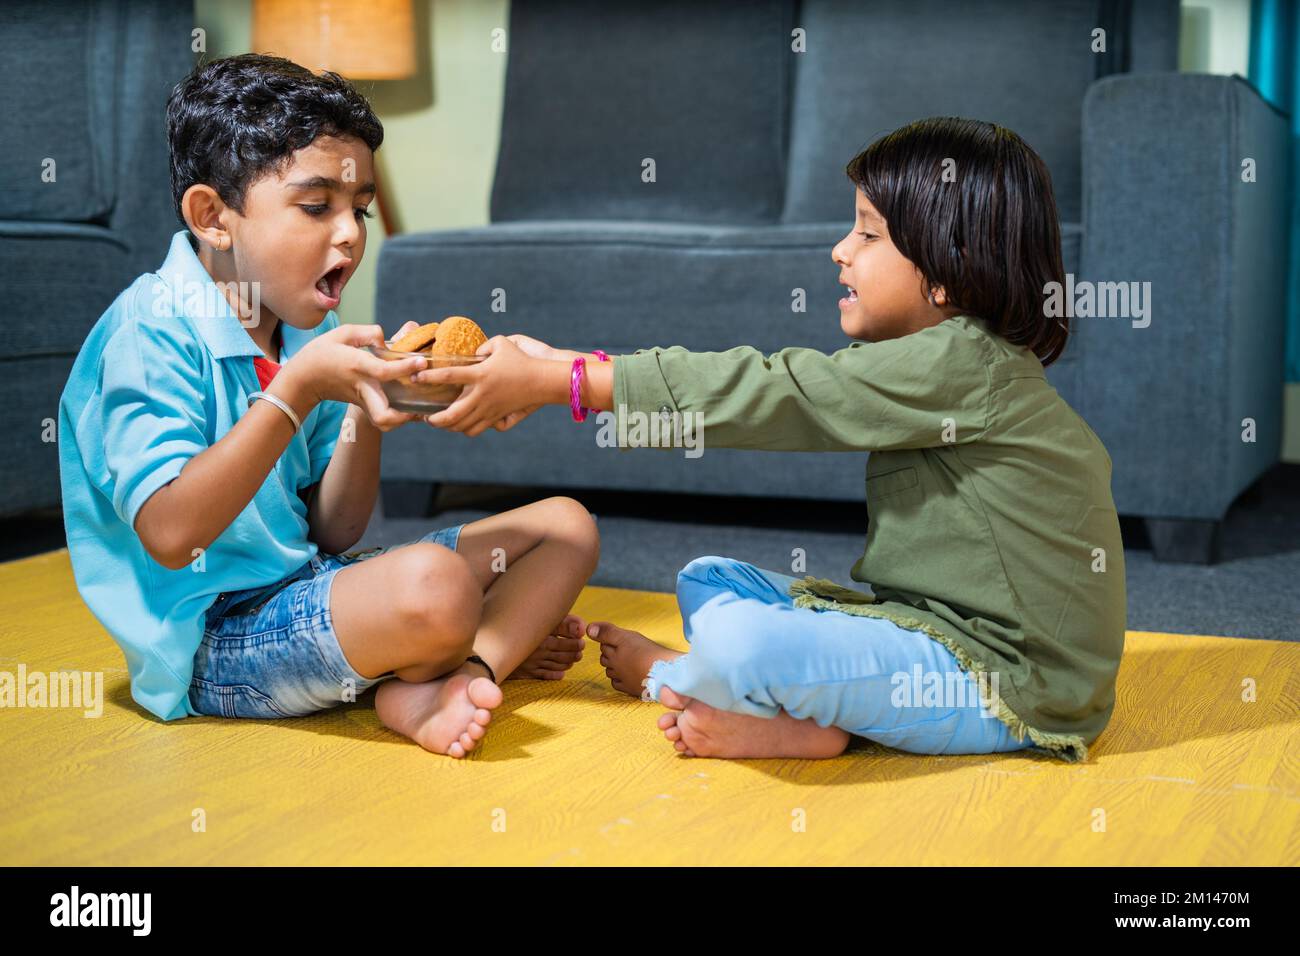 Young siblings kids fighting for snacks or biscuit while sitting on floor at home - concept of childhood lifestyle, relationships and weekend holidays Stock Photo